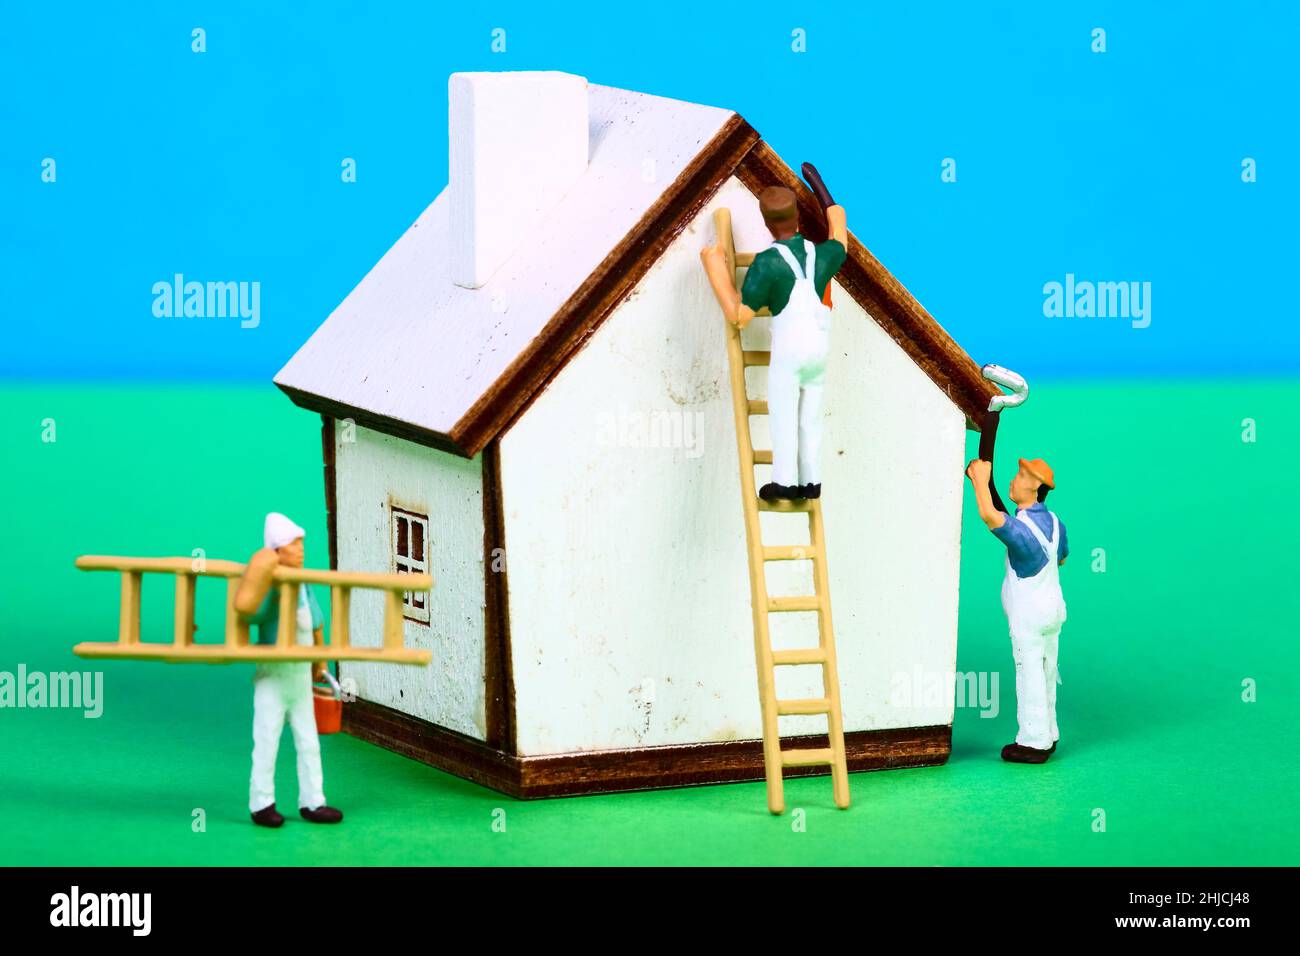 Conceptual image of miniature figure decorators painting the walls of a model house Stock Photo